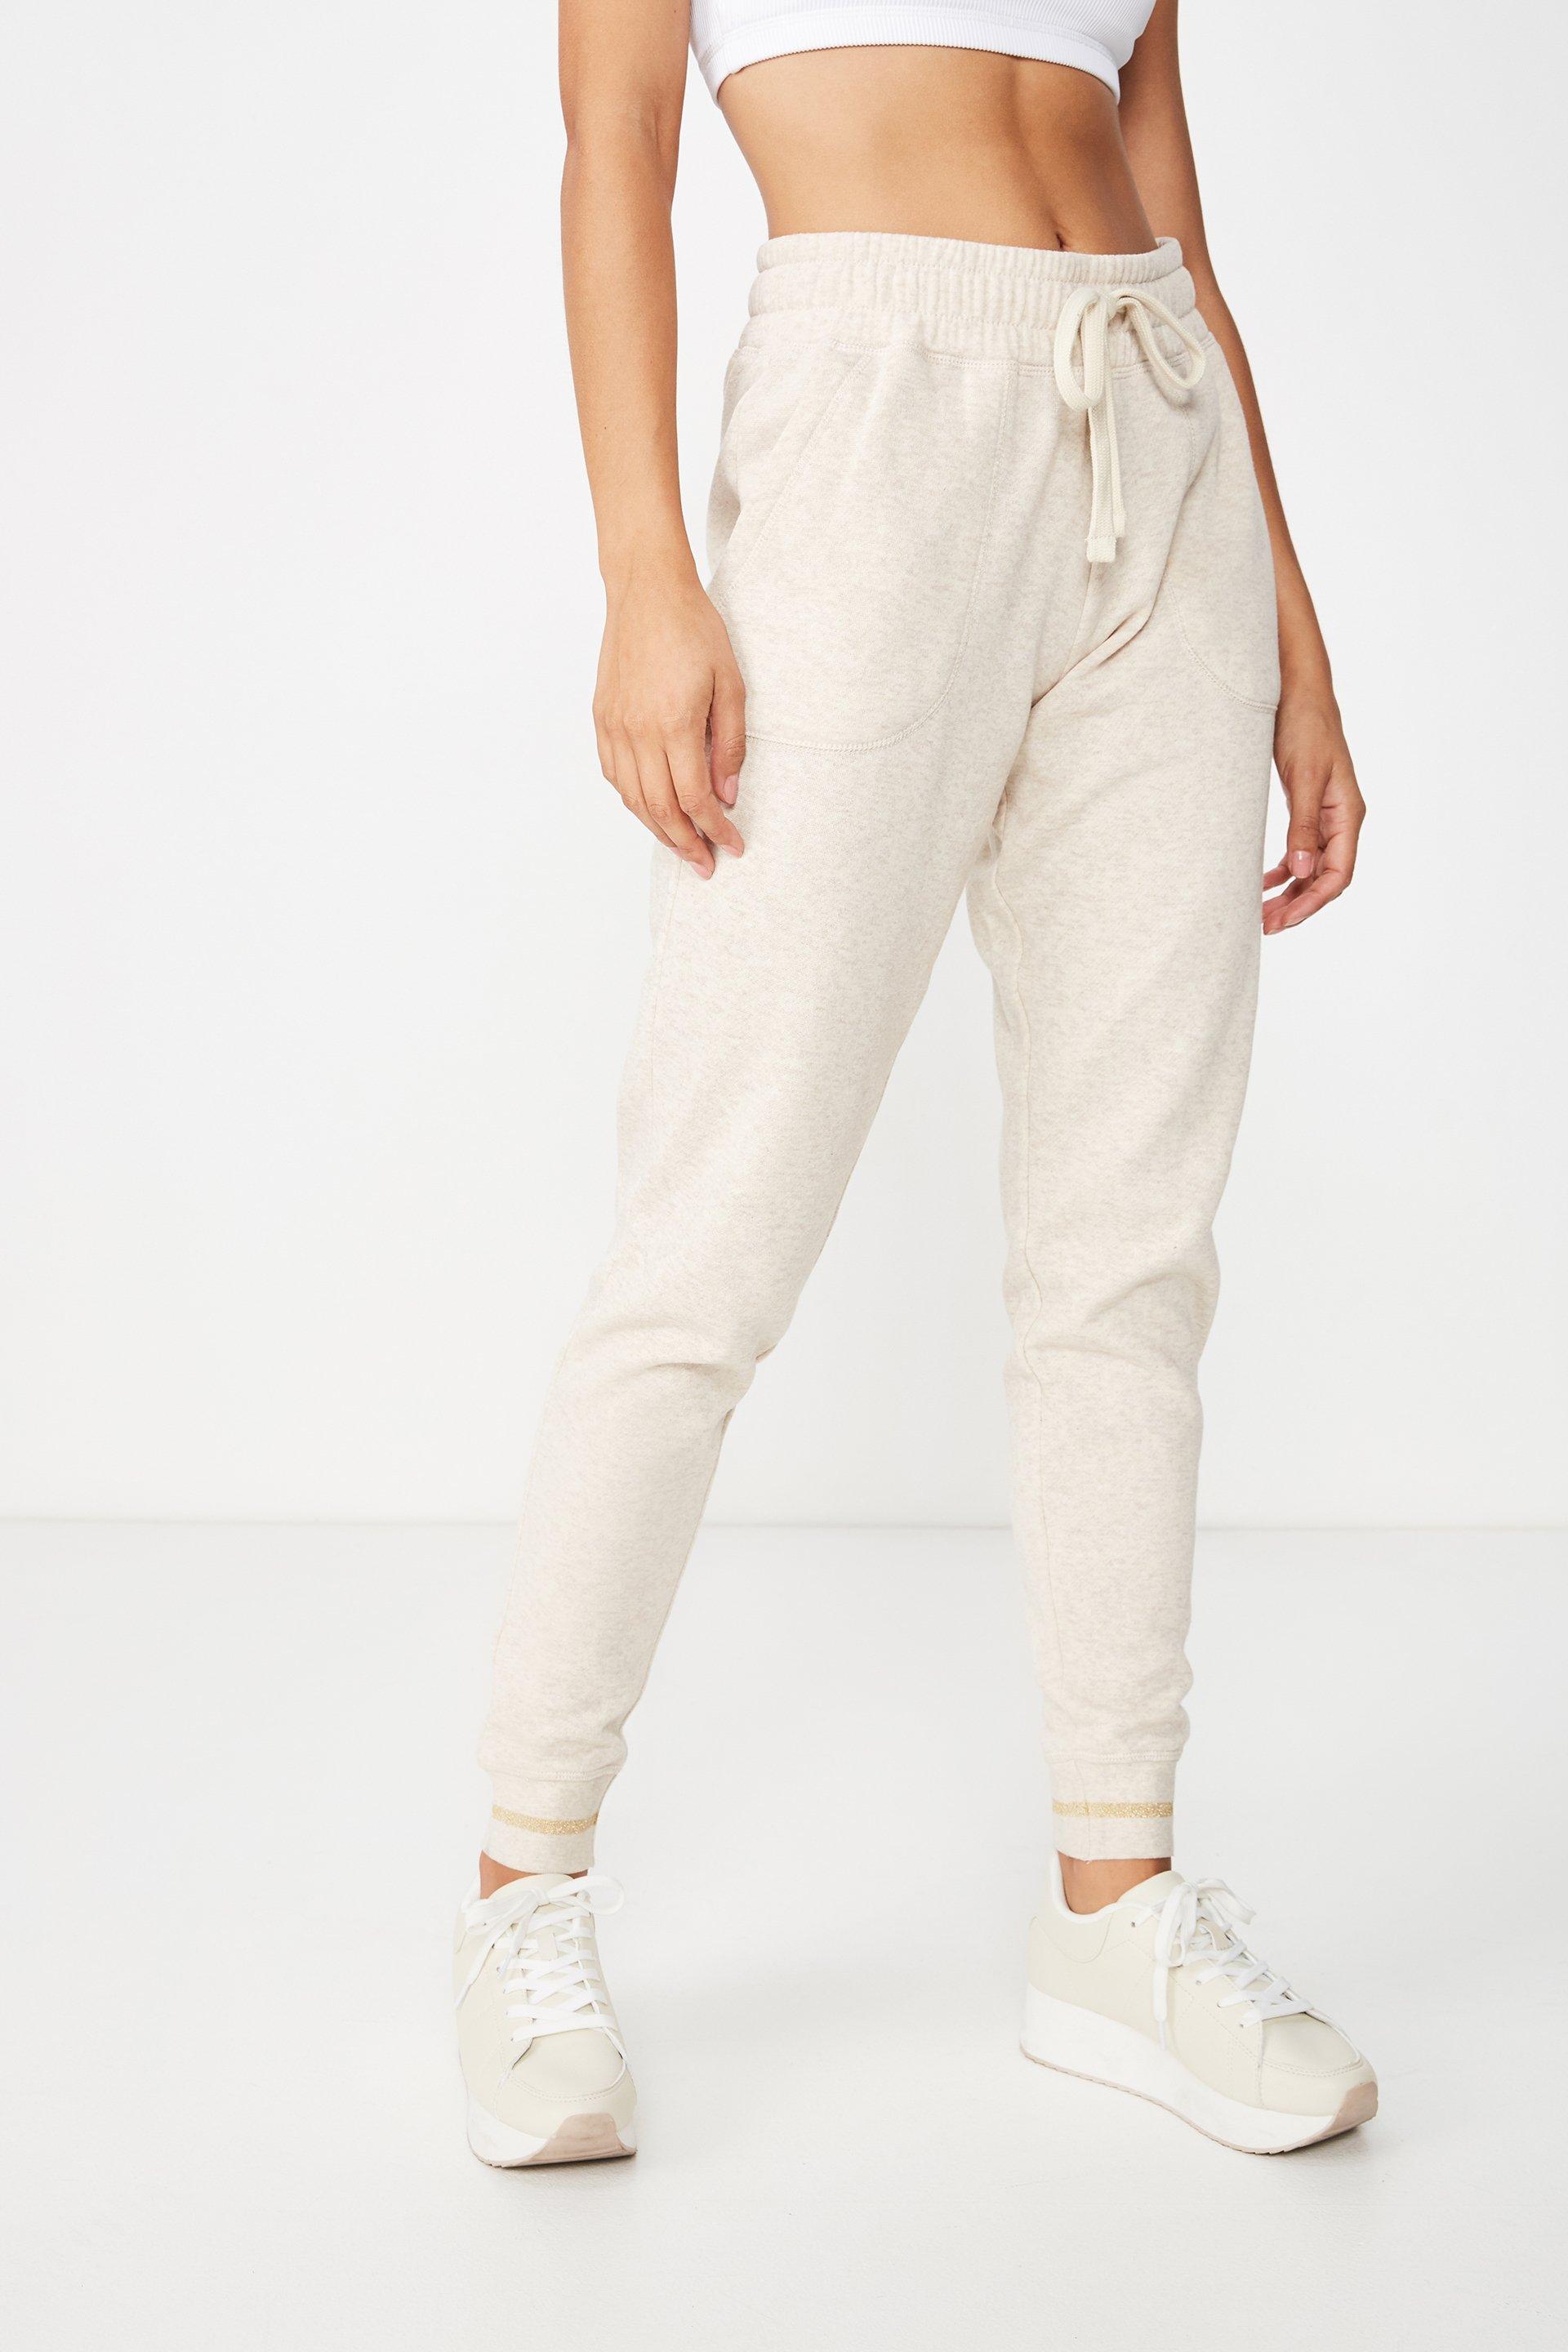 Gym track pants - oatmeal marle Cotton On Bottoms | Superbalist.com